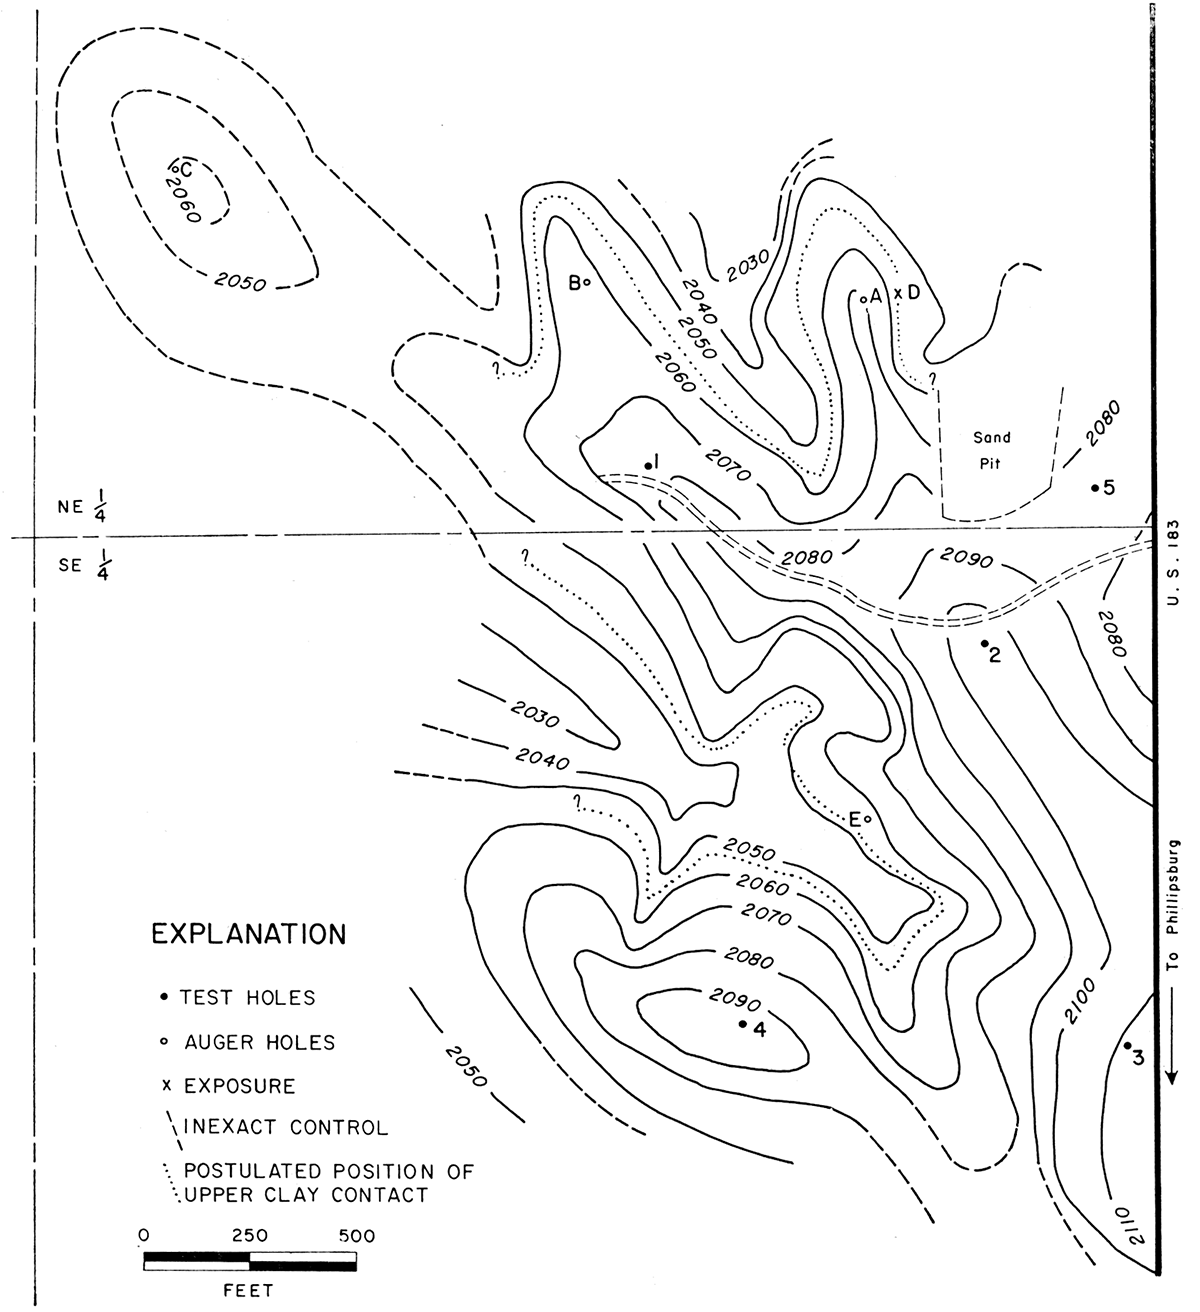 Topographic map of part of sec. 10, T. 1 S., R. 18 W., showing location of exposure, auger holes, and drill holes.